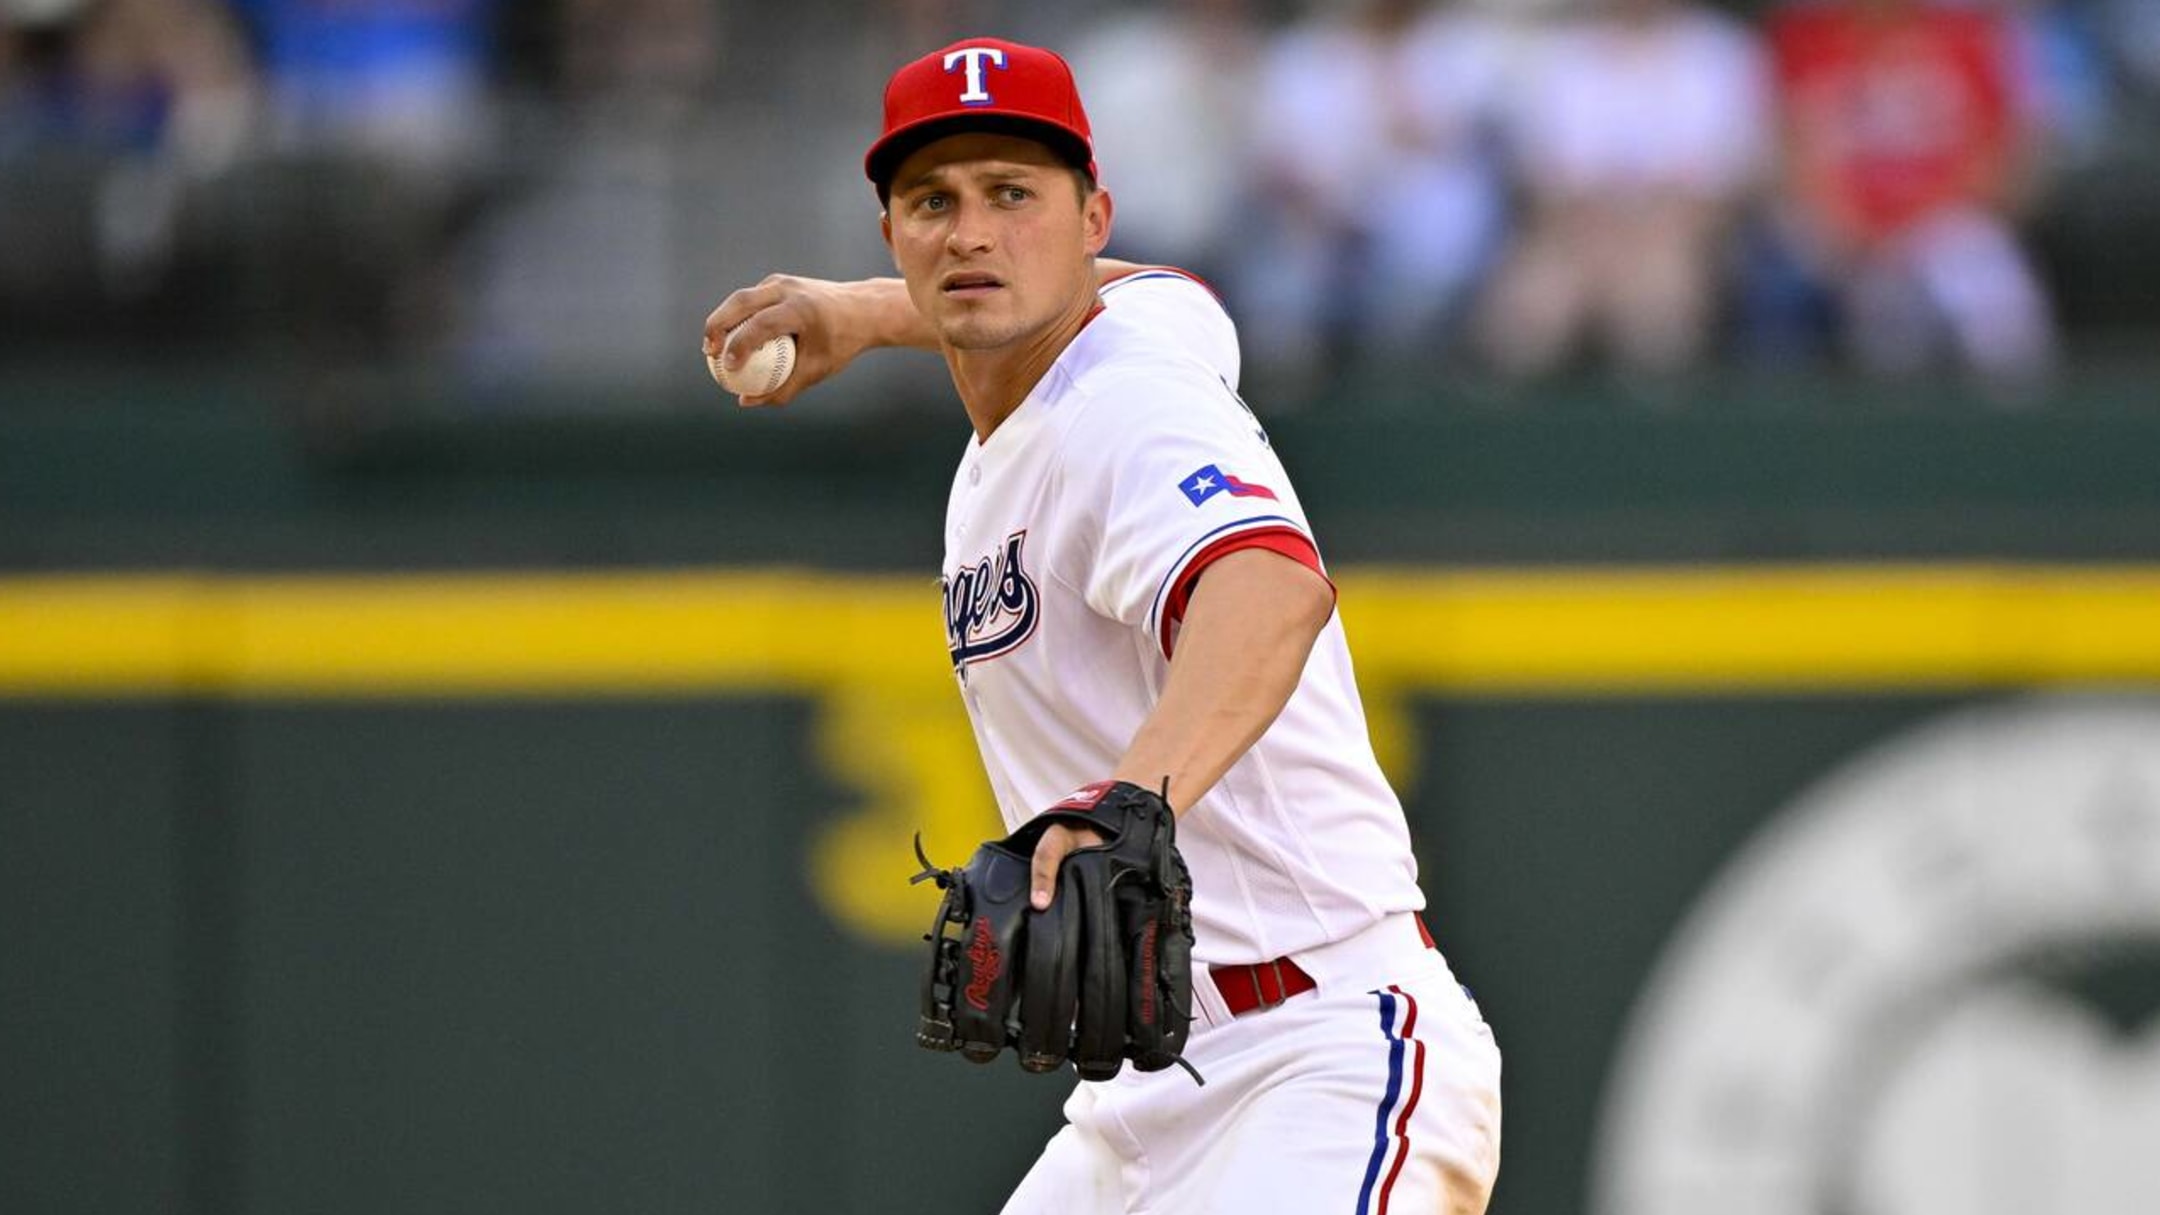 Corey Seager injury: Updates on Texas Rangers star's hamstring